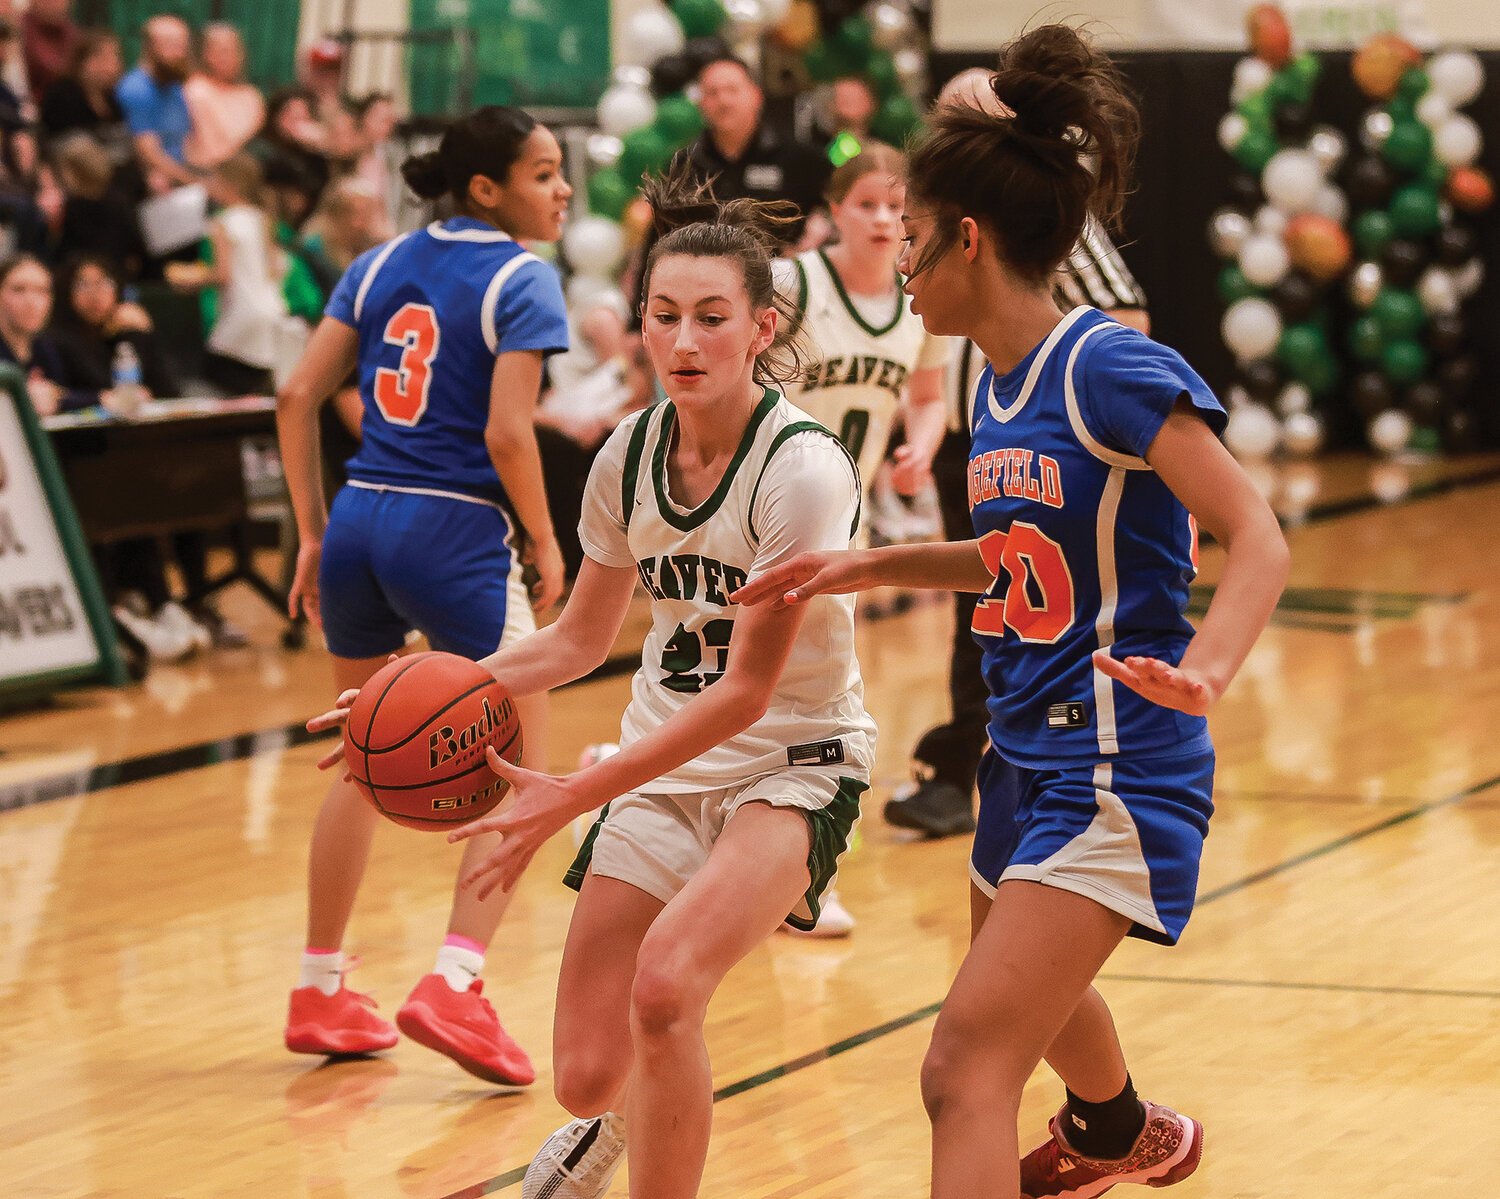 Woodland's Lainey Haden drives the lane during the Beavers’ 57-45 loss to the Ridgefield Spudders on Friday, Feb. 2.